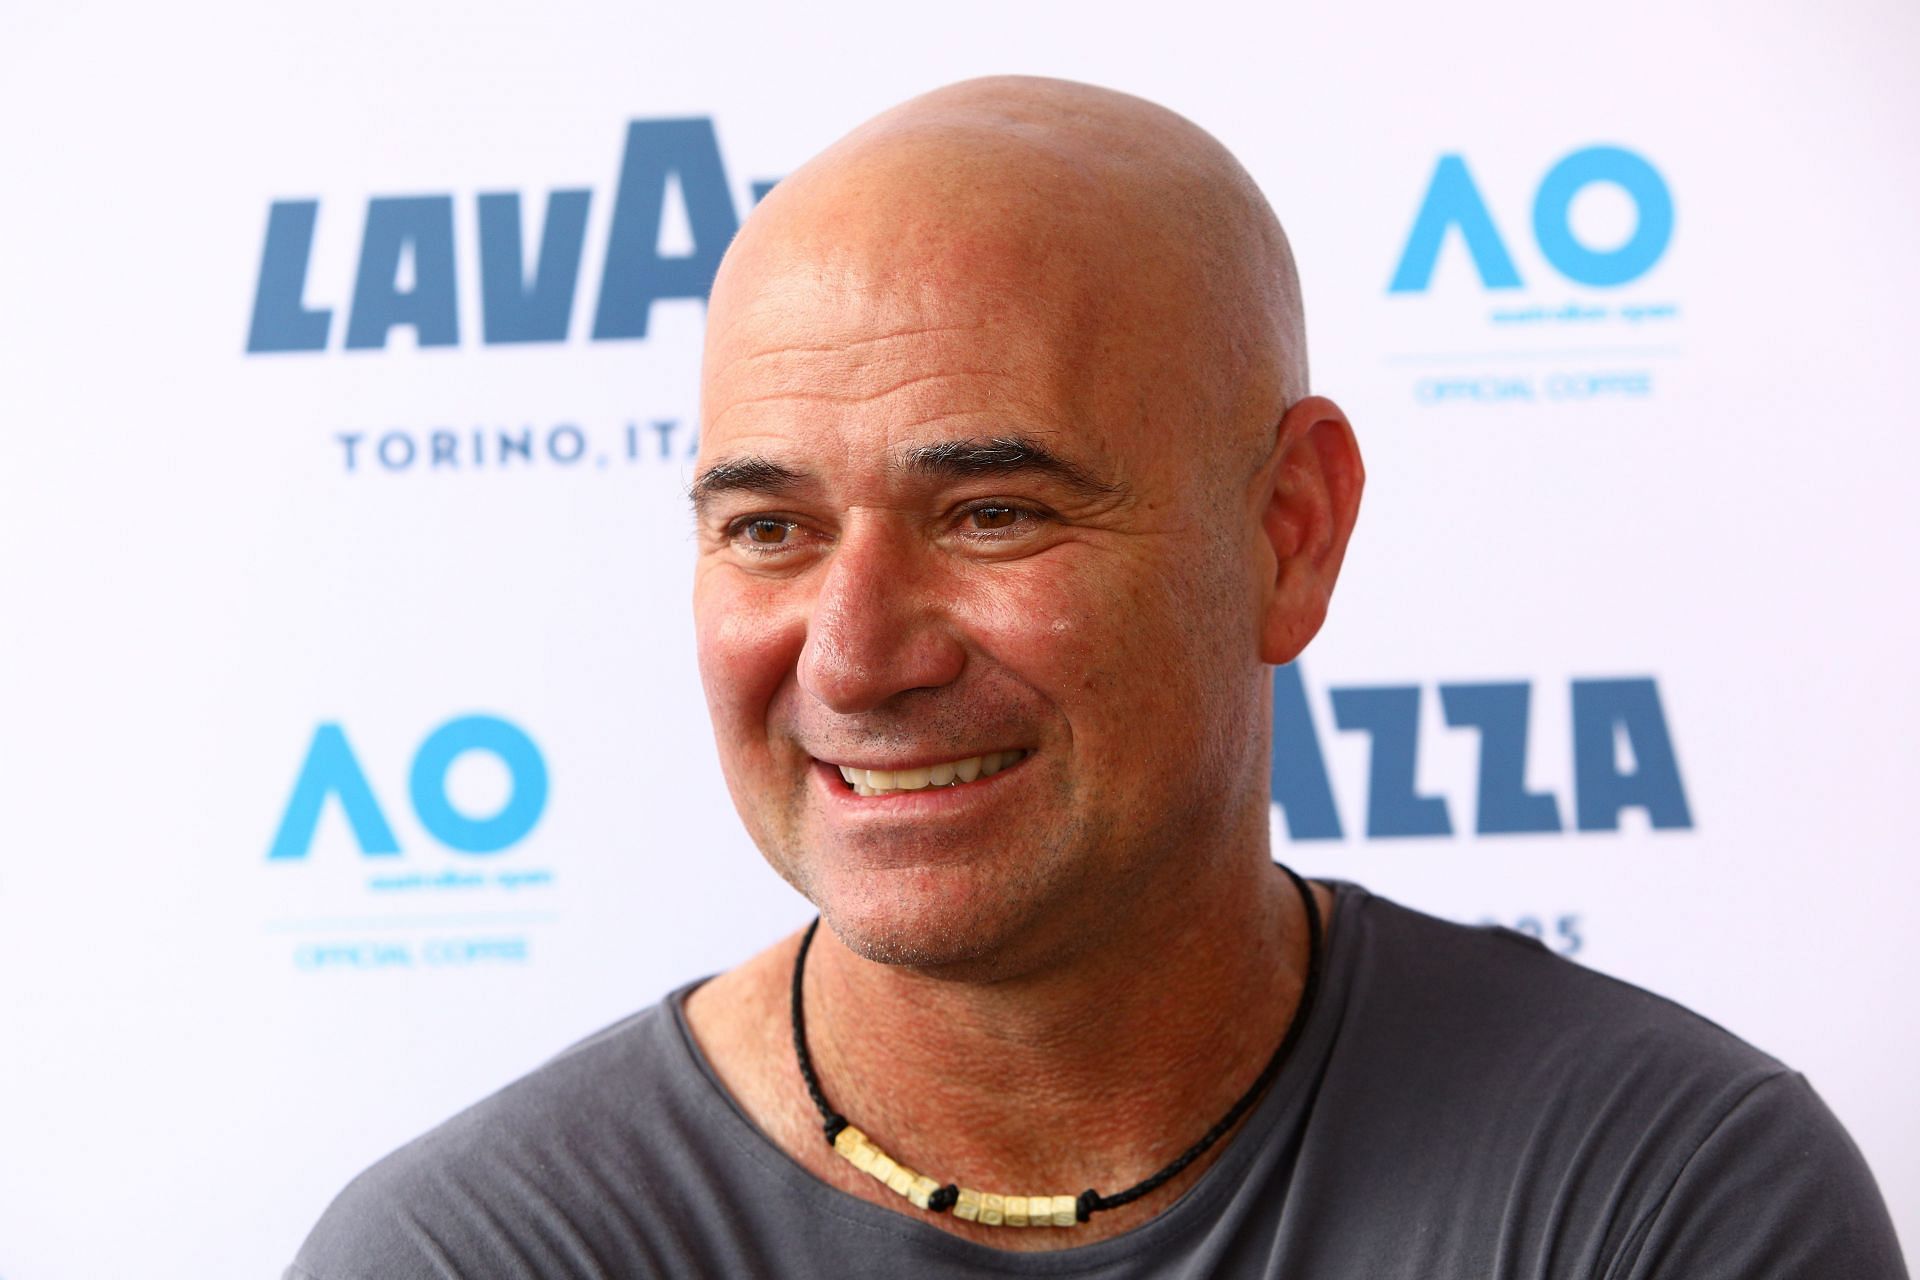 Andre Agassi during the 2019 Australian Open.